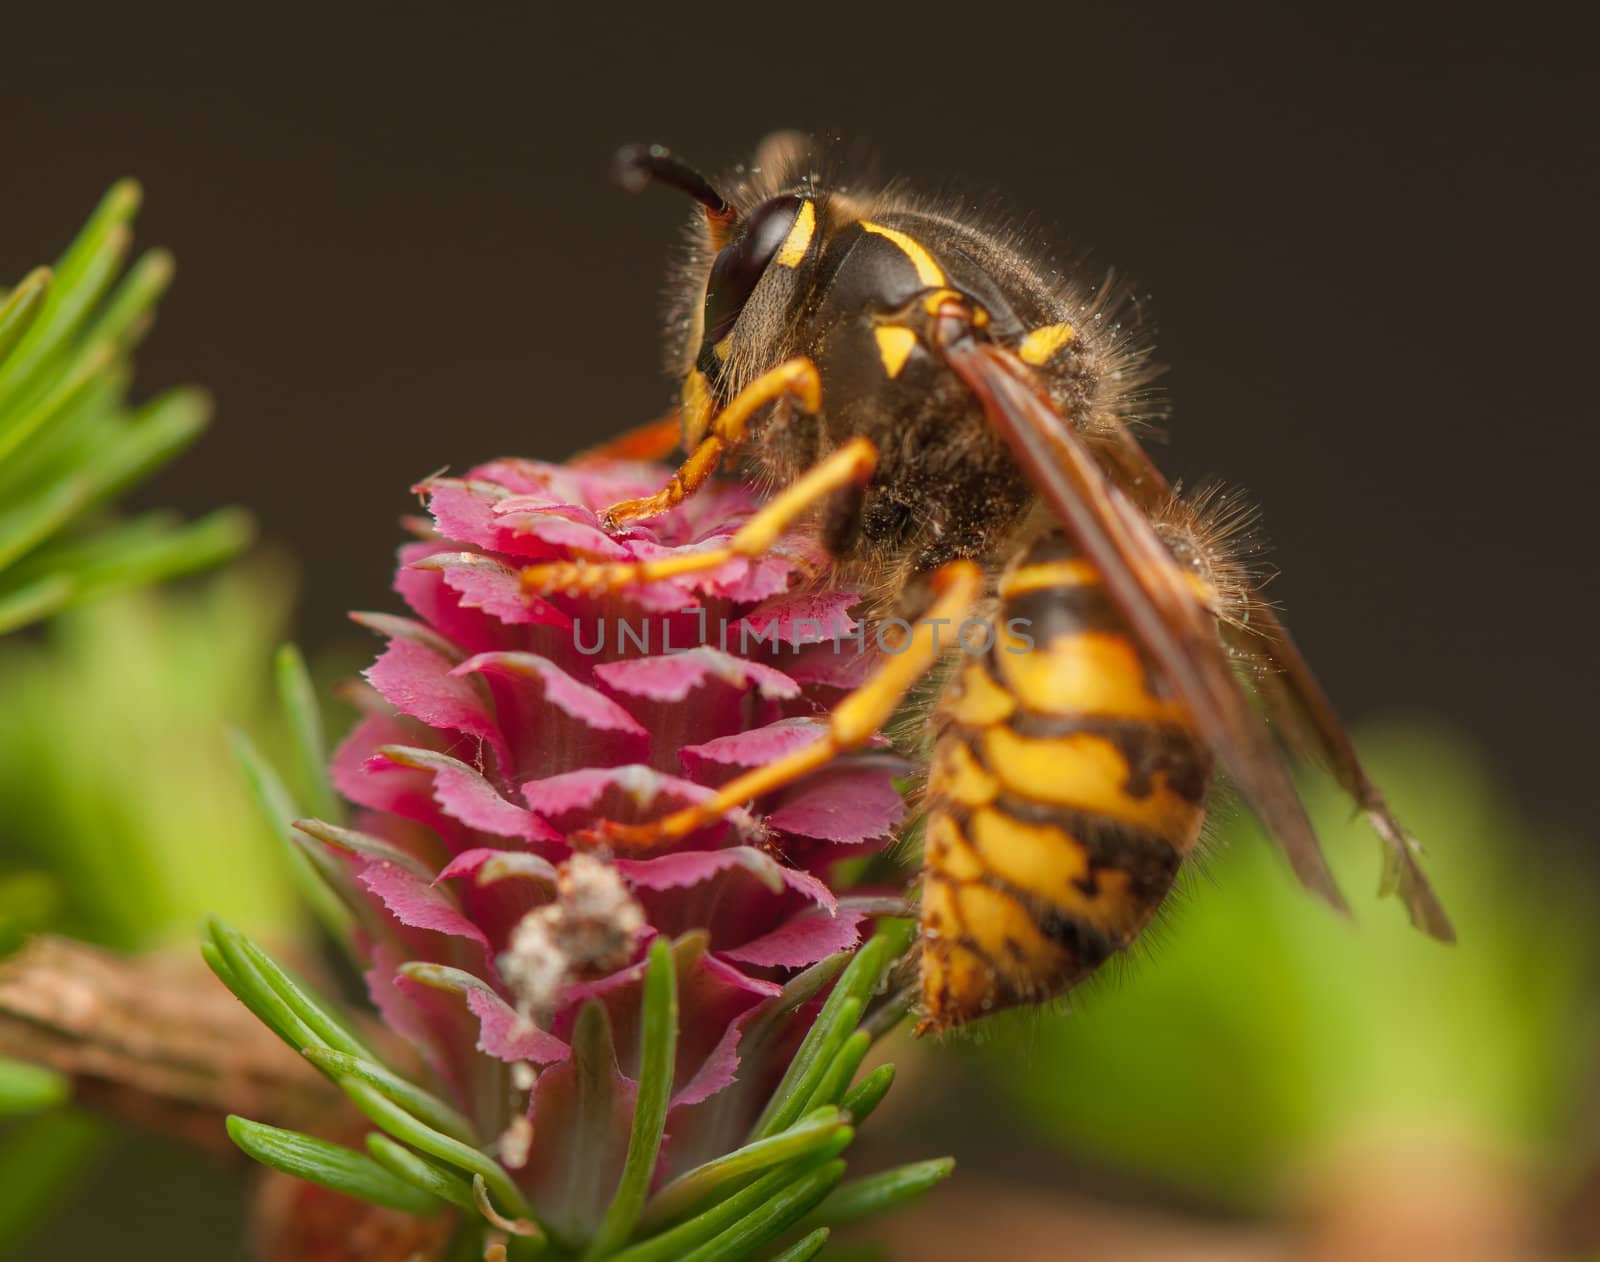 Larch flower and wasp